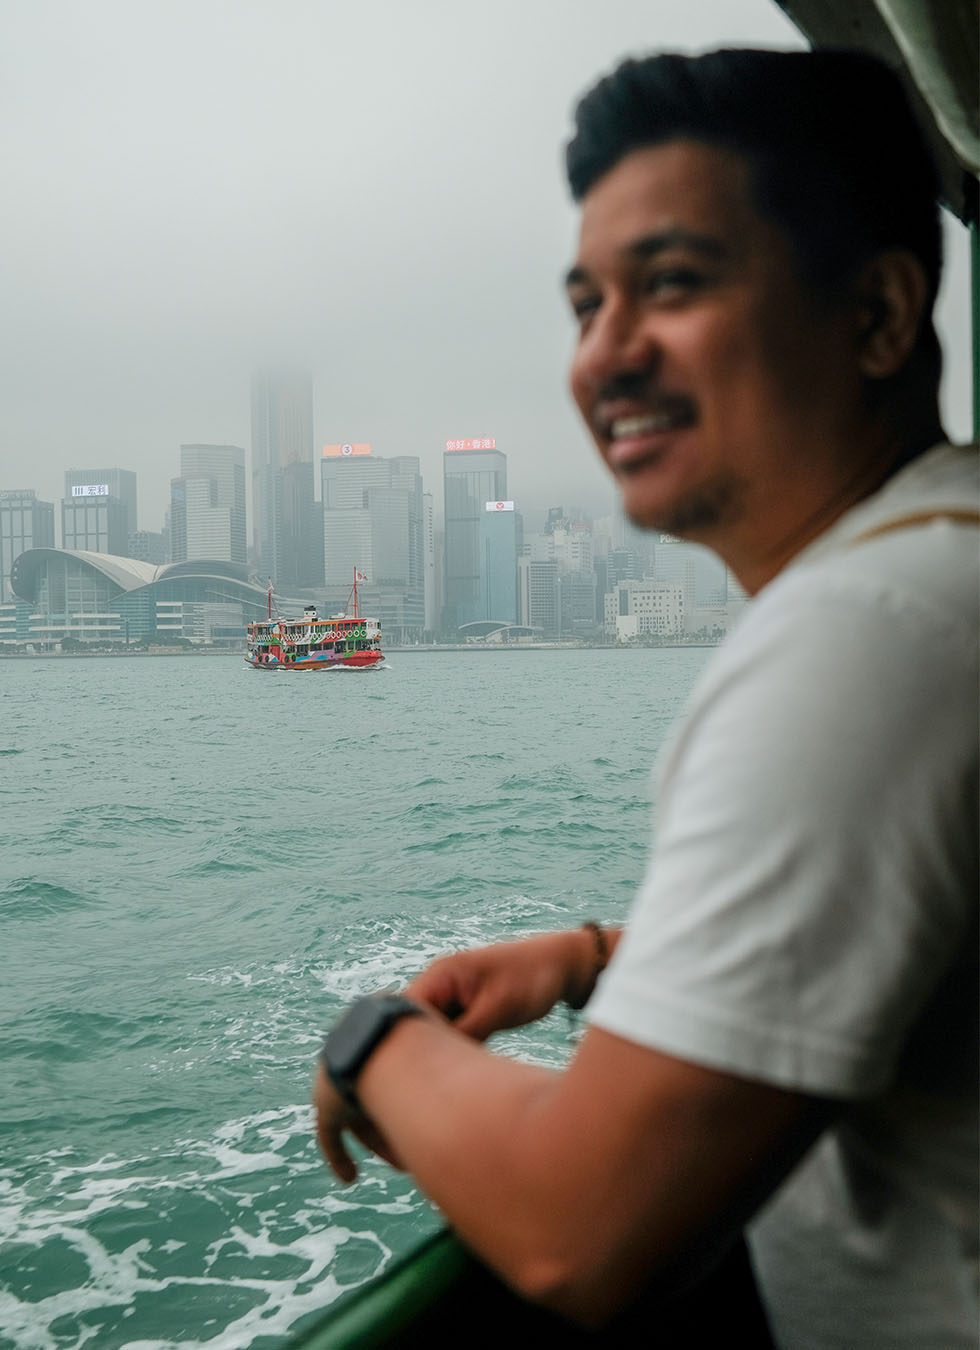 Ryan blurred on a boat ride with Honk Kong in focus in the background